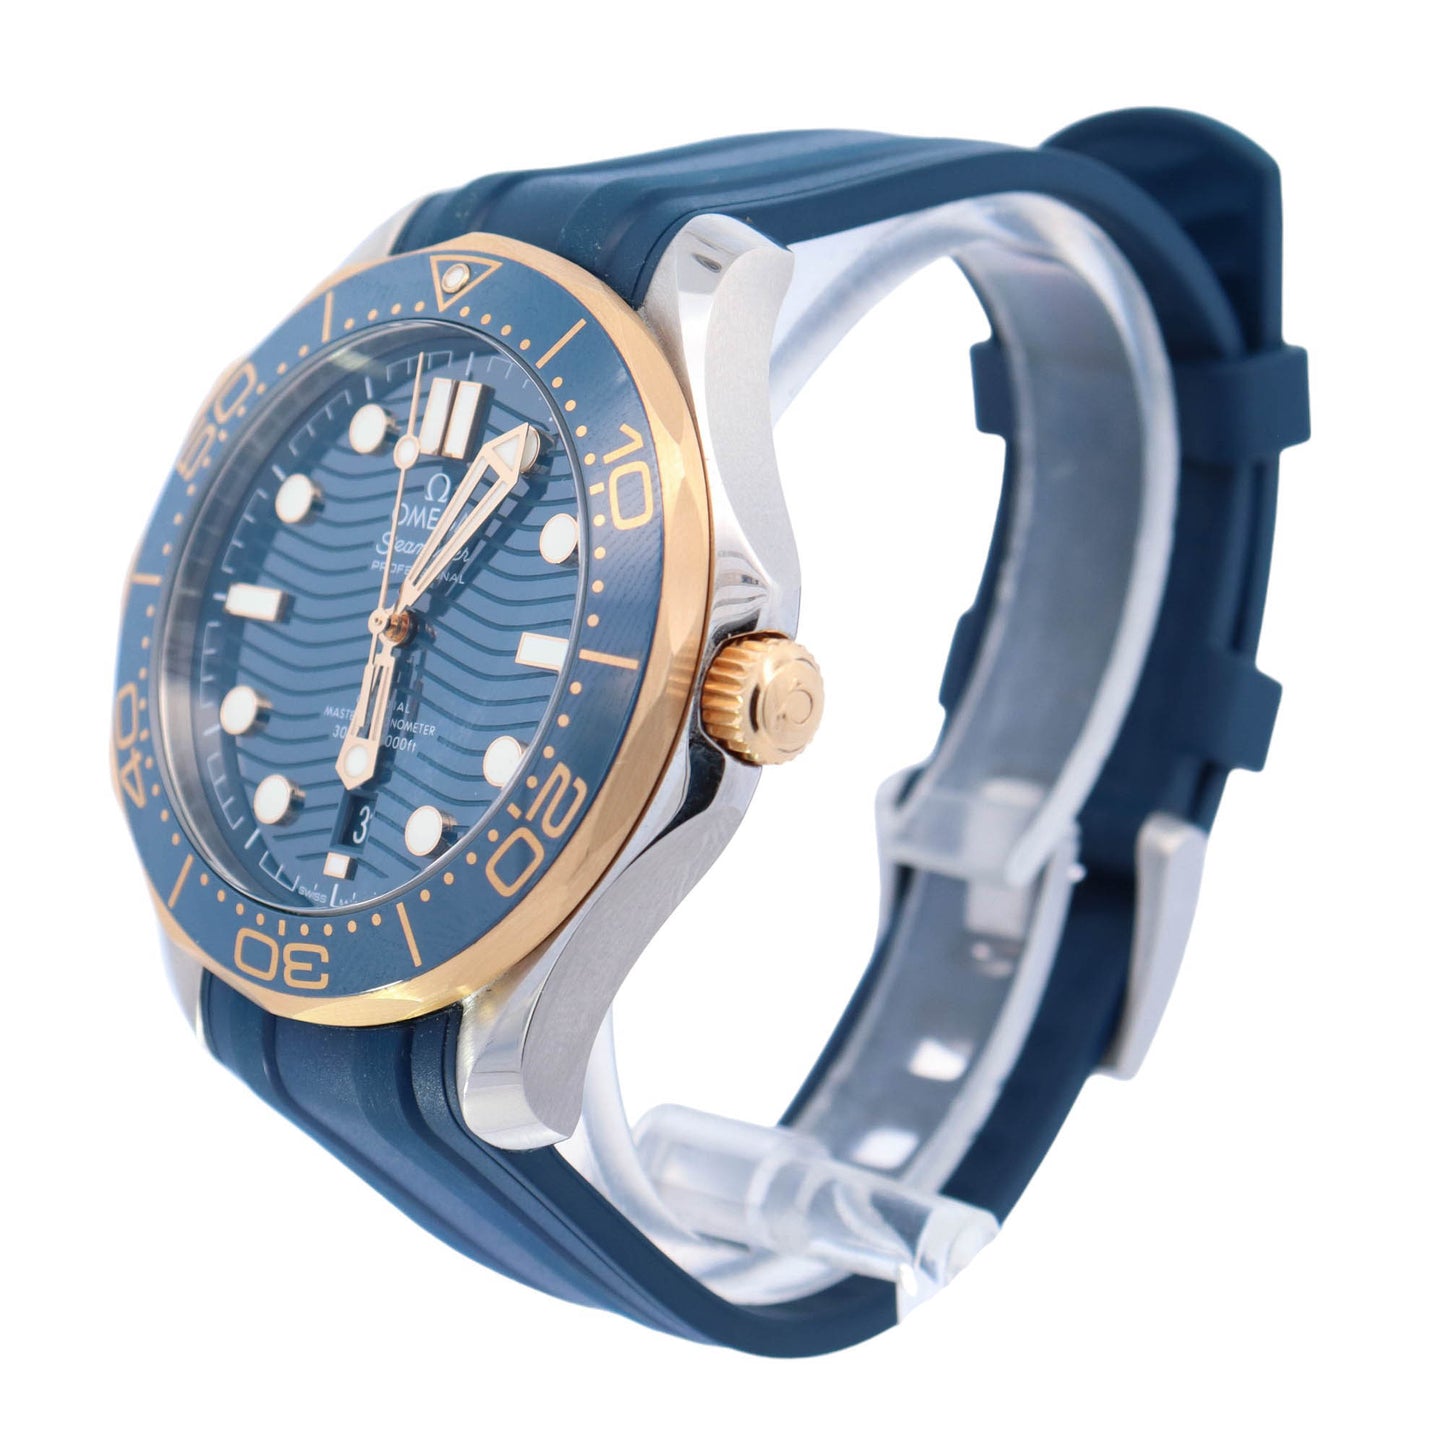 Omega Sea Master Two Tone Yellow Gold & Steel 42mm Blue Dot Dial Watch Reference#: 210.22.42.20.03.001 - Happy Jewelers Fine Jewelry Lifetime Warranty